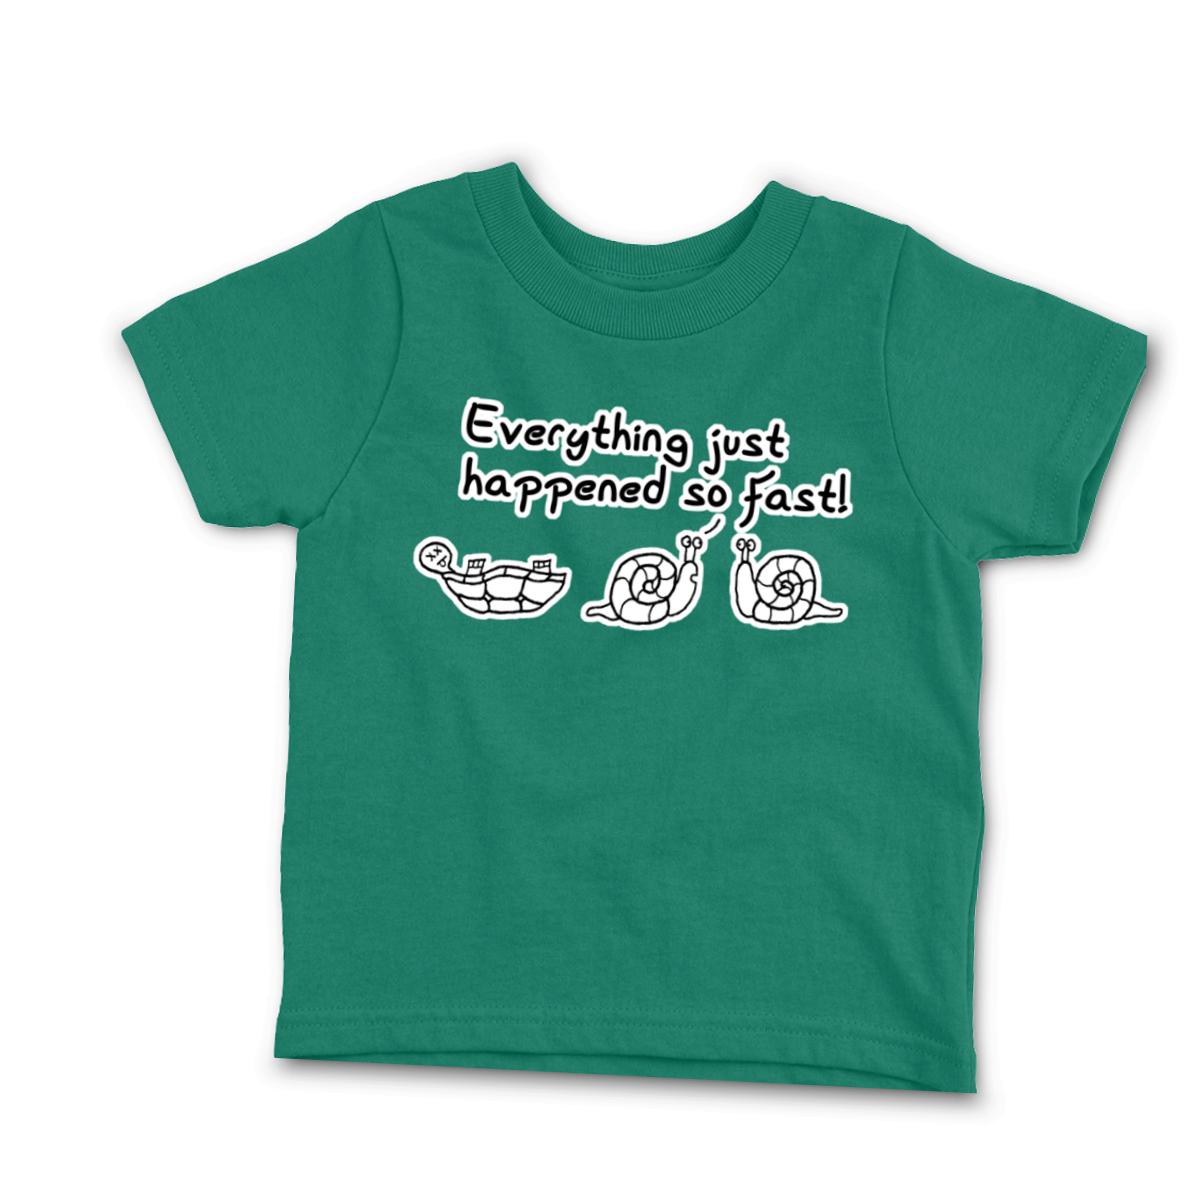 Happened So Fast Toddler Tee 56T kelly